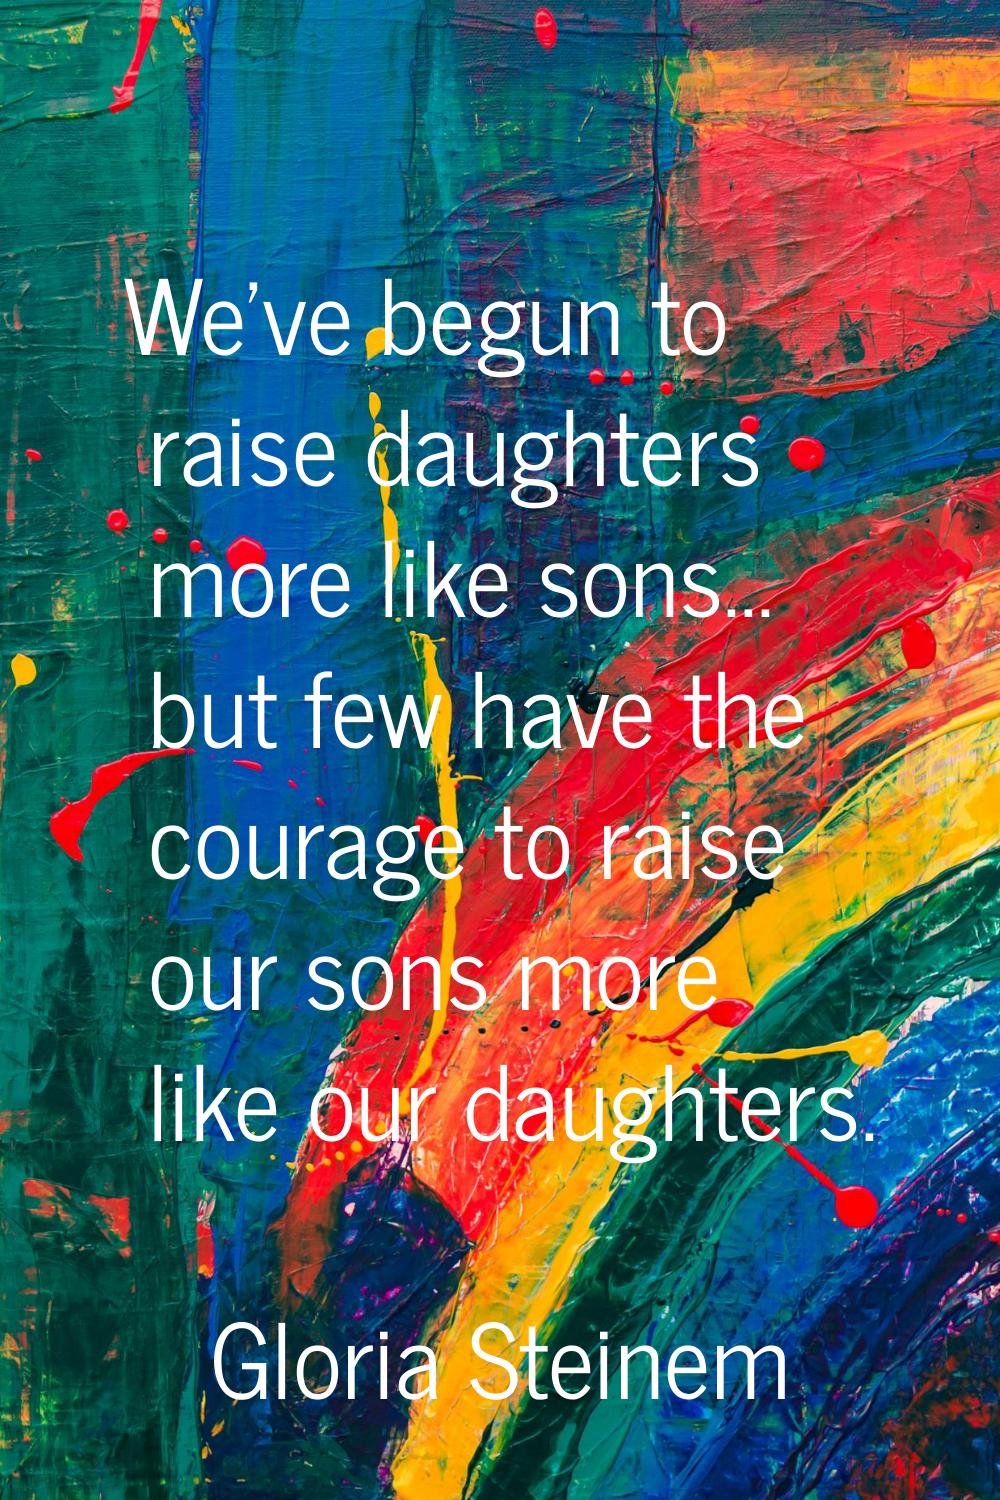 We've begun to raise daughters more like sons... but few have the courage to raise our sons more li